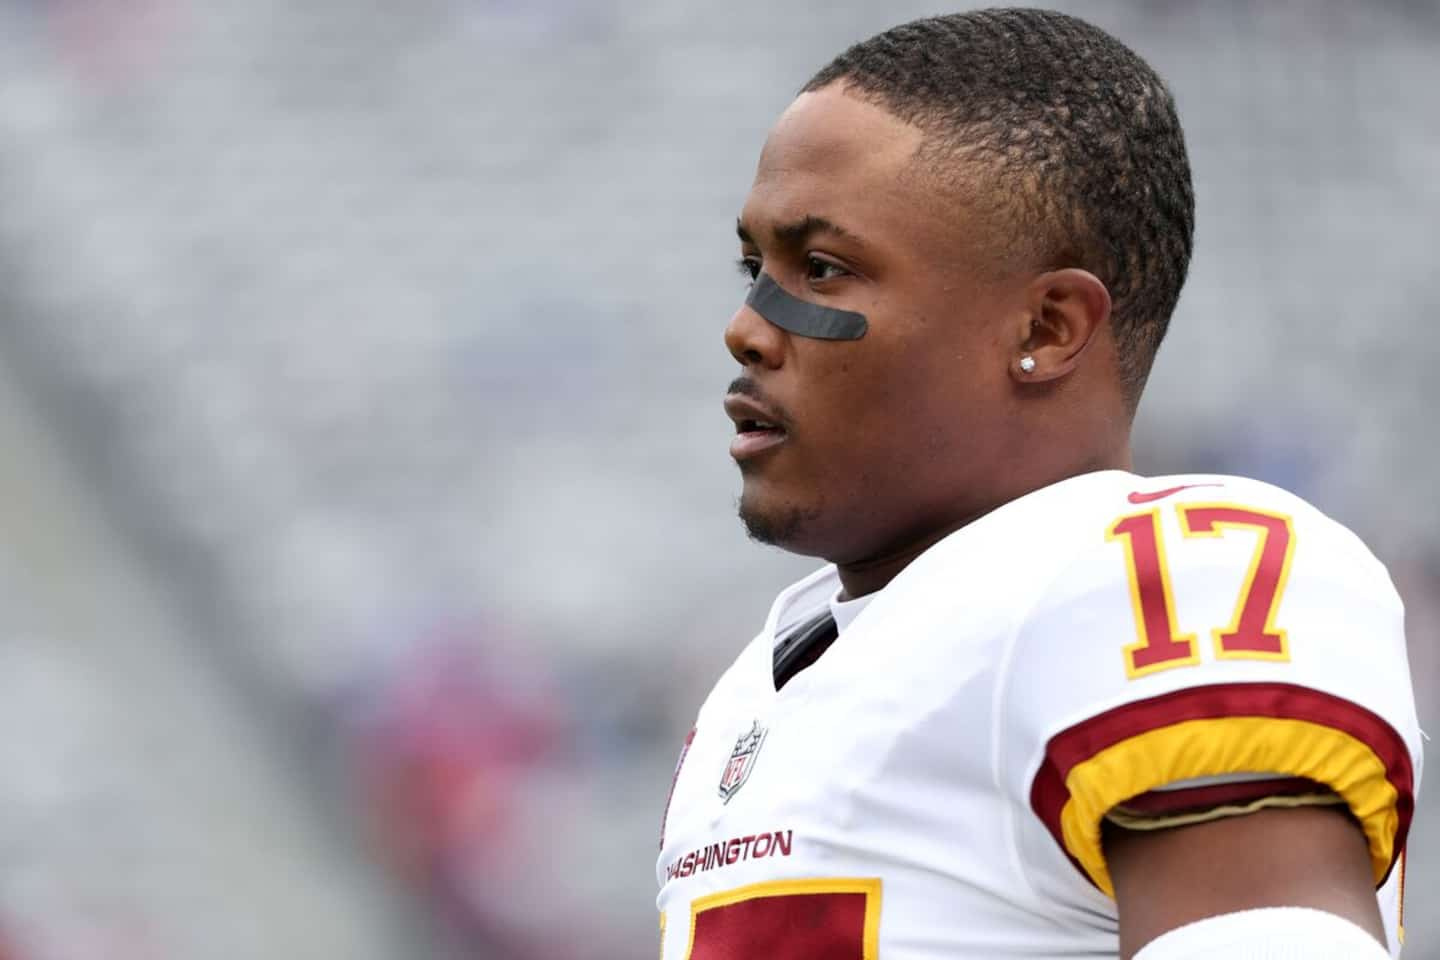 More than $70 million for Terry McLaurin